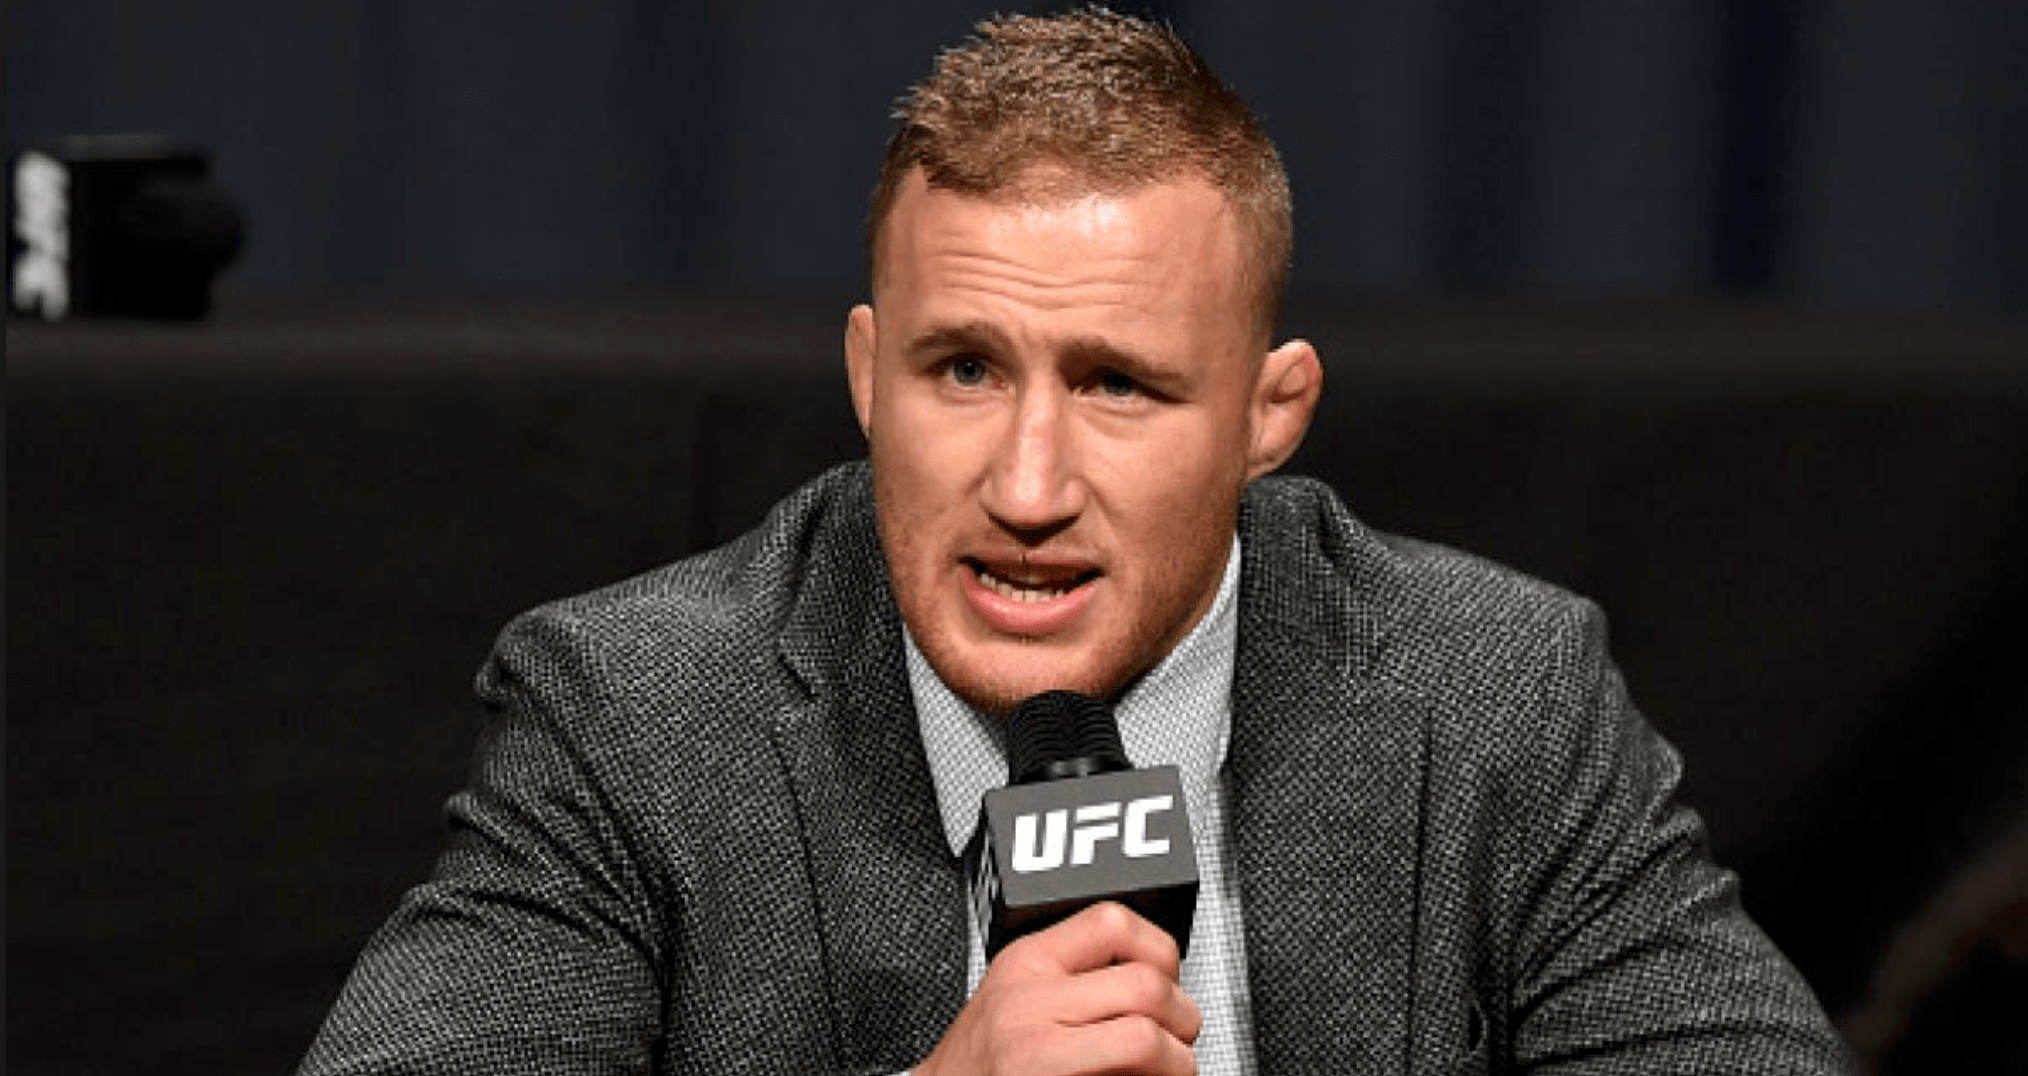 UFC: Justin Gaethje Is Feeling Frustrated But Is Sticking To His Guns